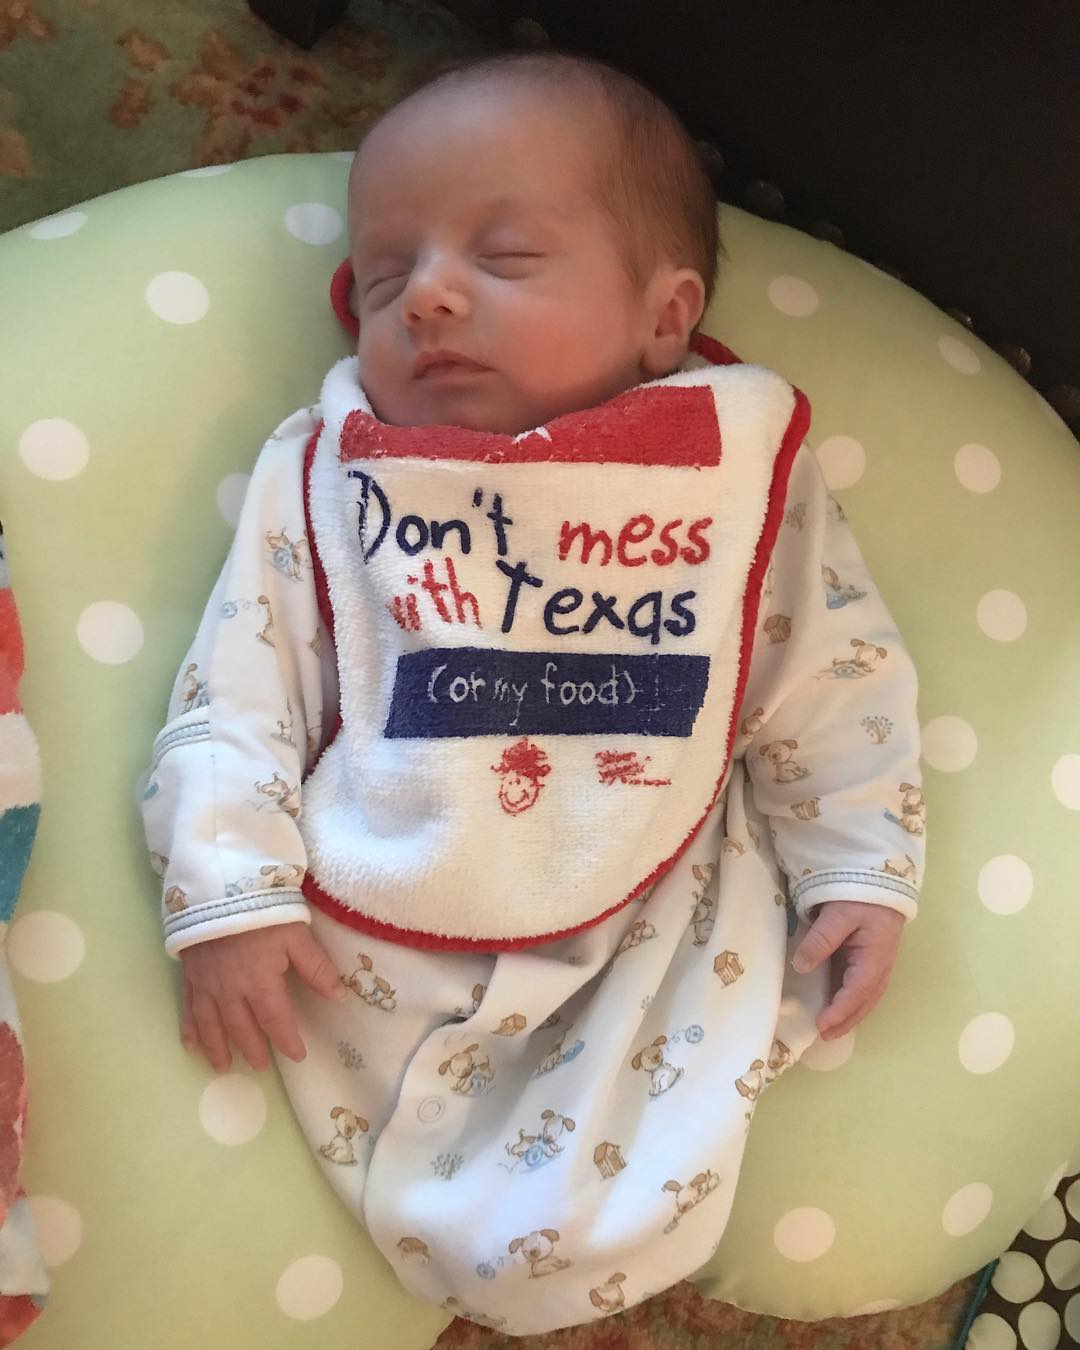 This South Carolina boy has a message straight from Texas! #dontmesswithtexas #twinslife #tw